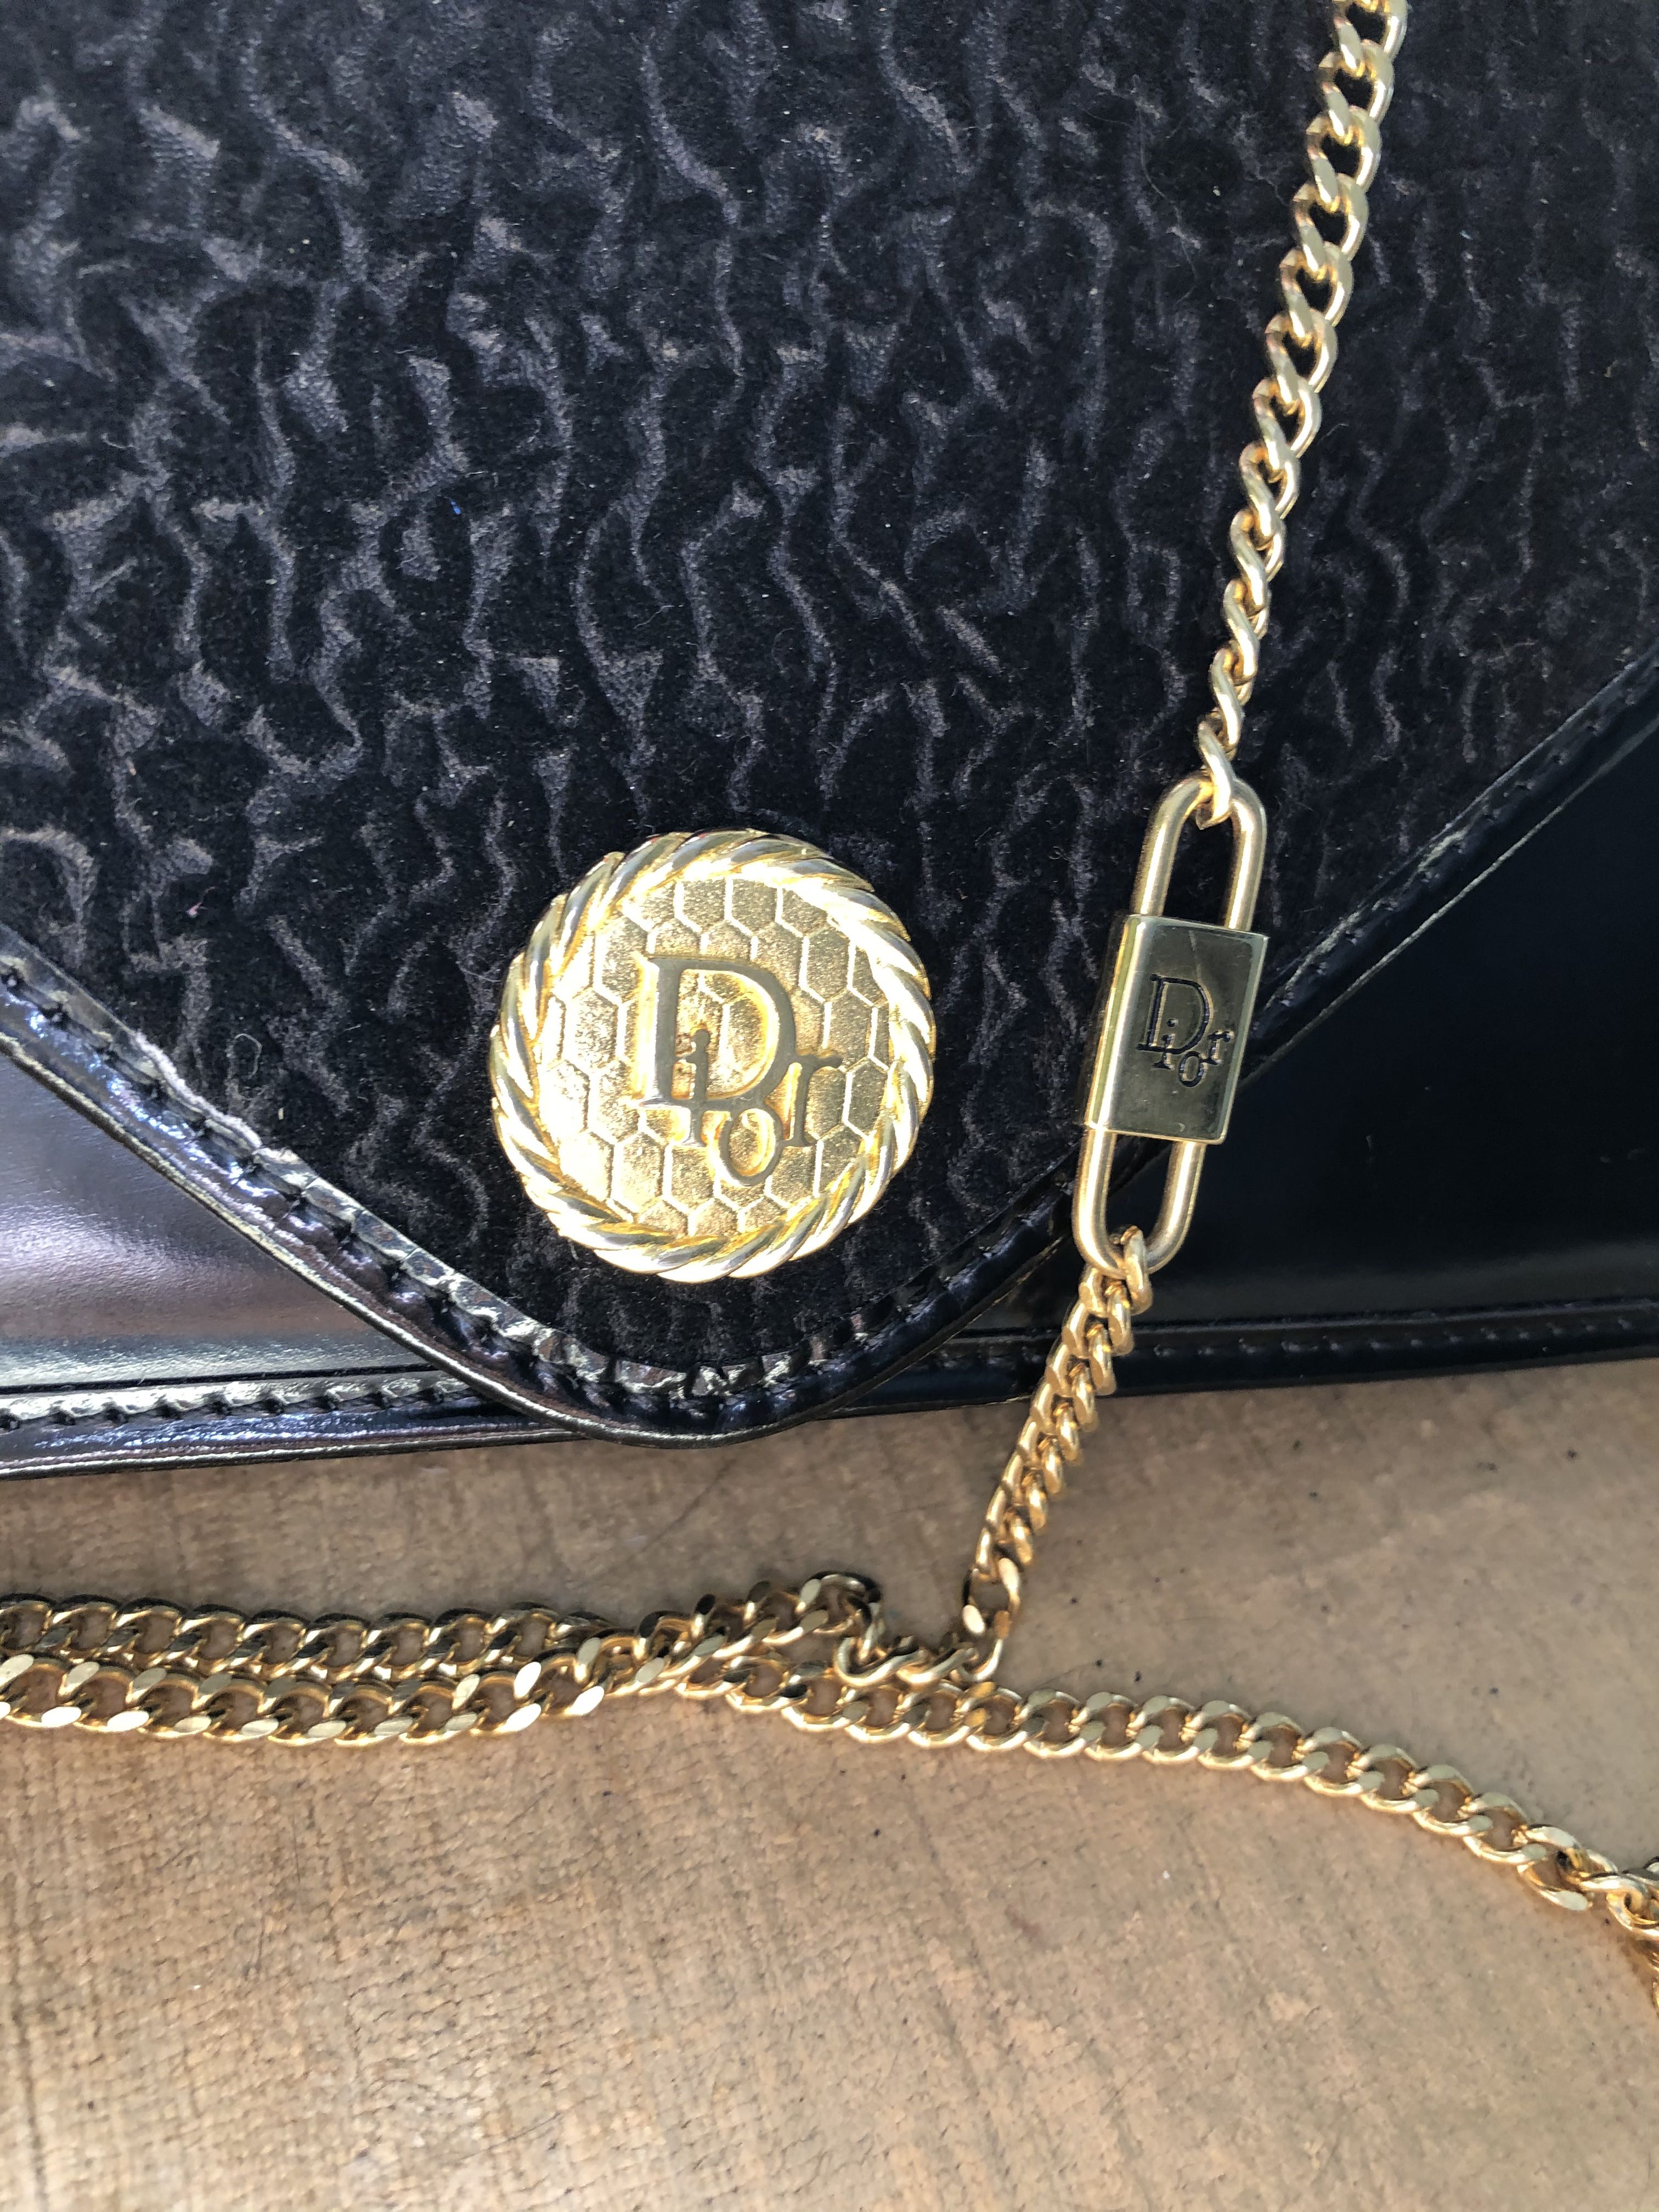 Dior Vintage gold chain bag. Can use as a clutch